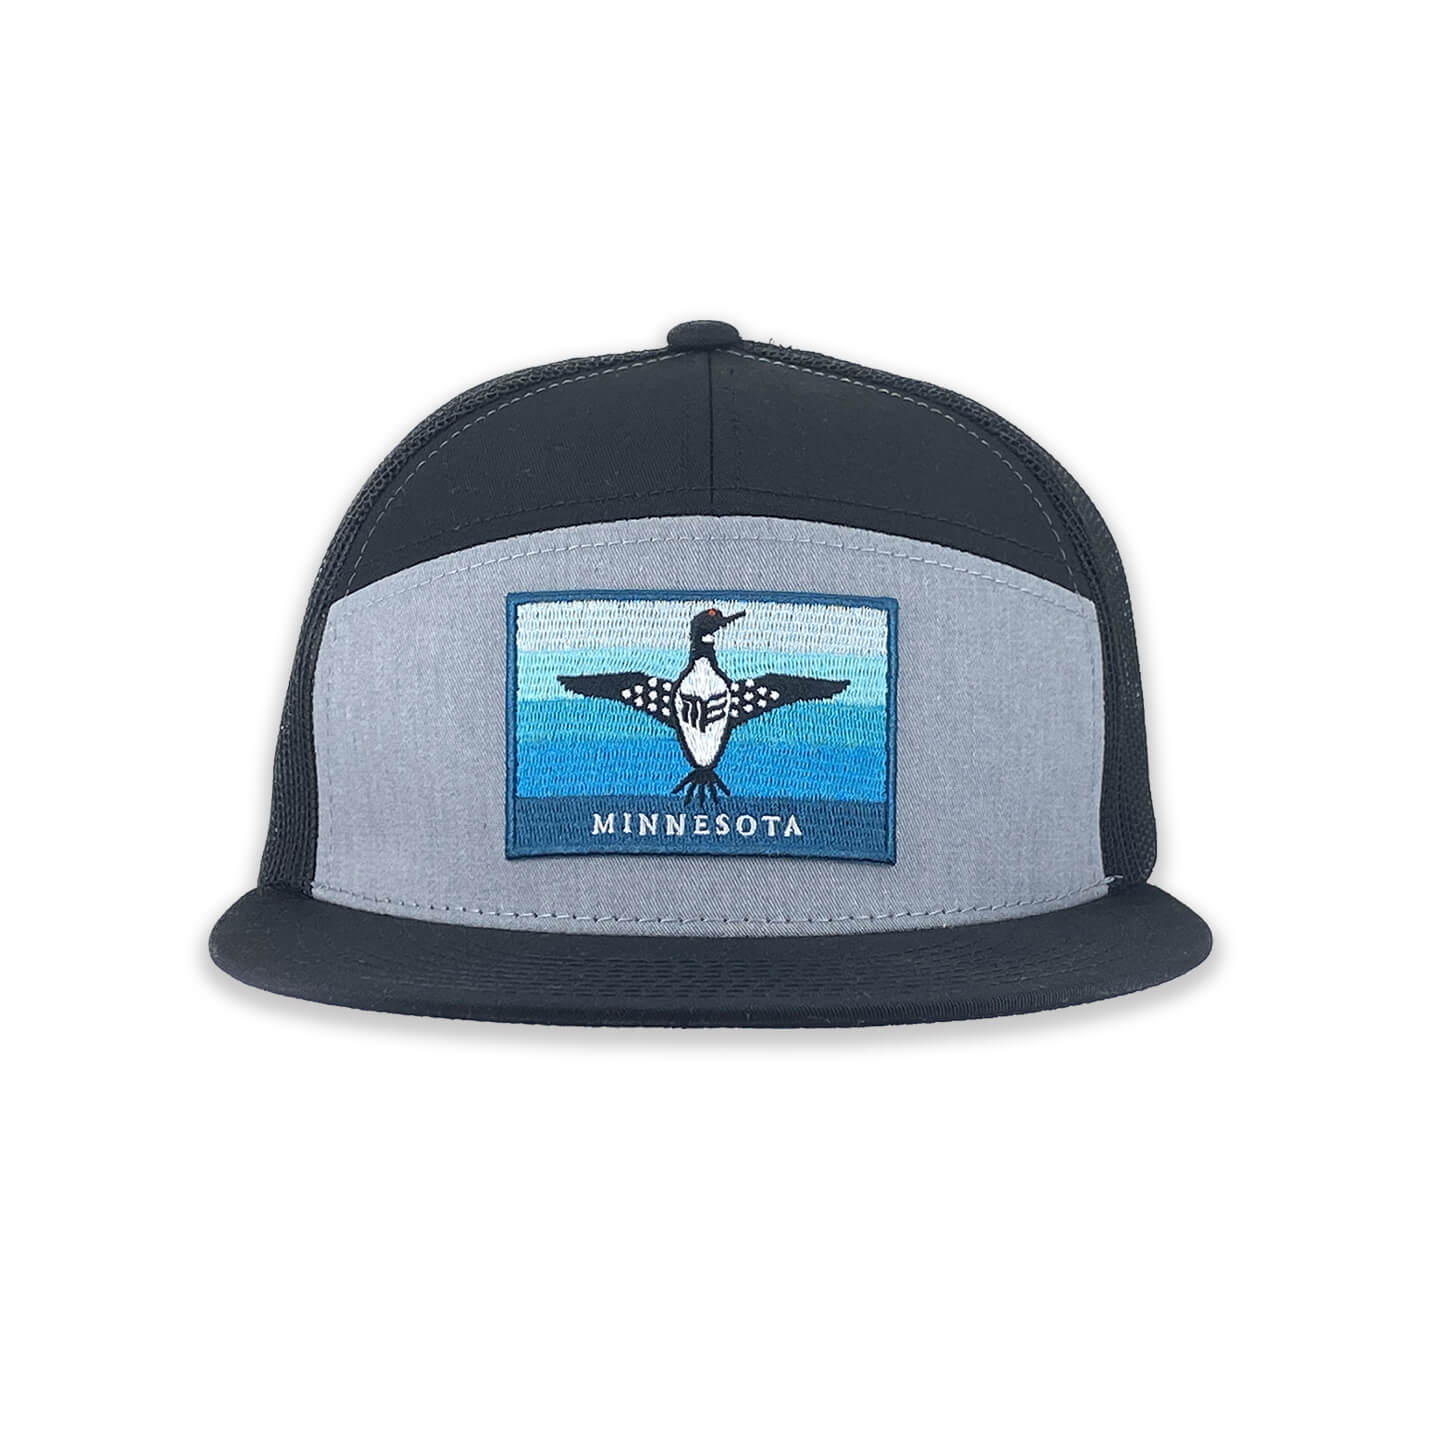 7 Panel Trucker hat with Blue Loon Embroidery Patch